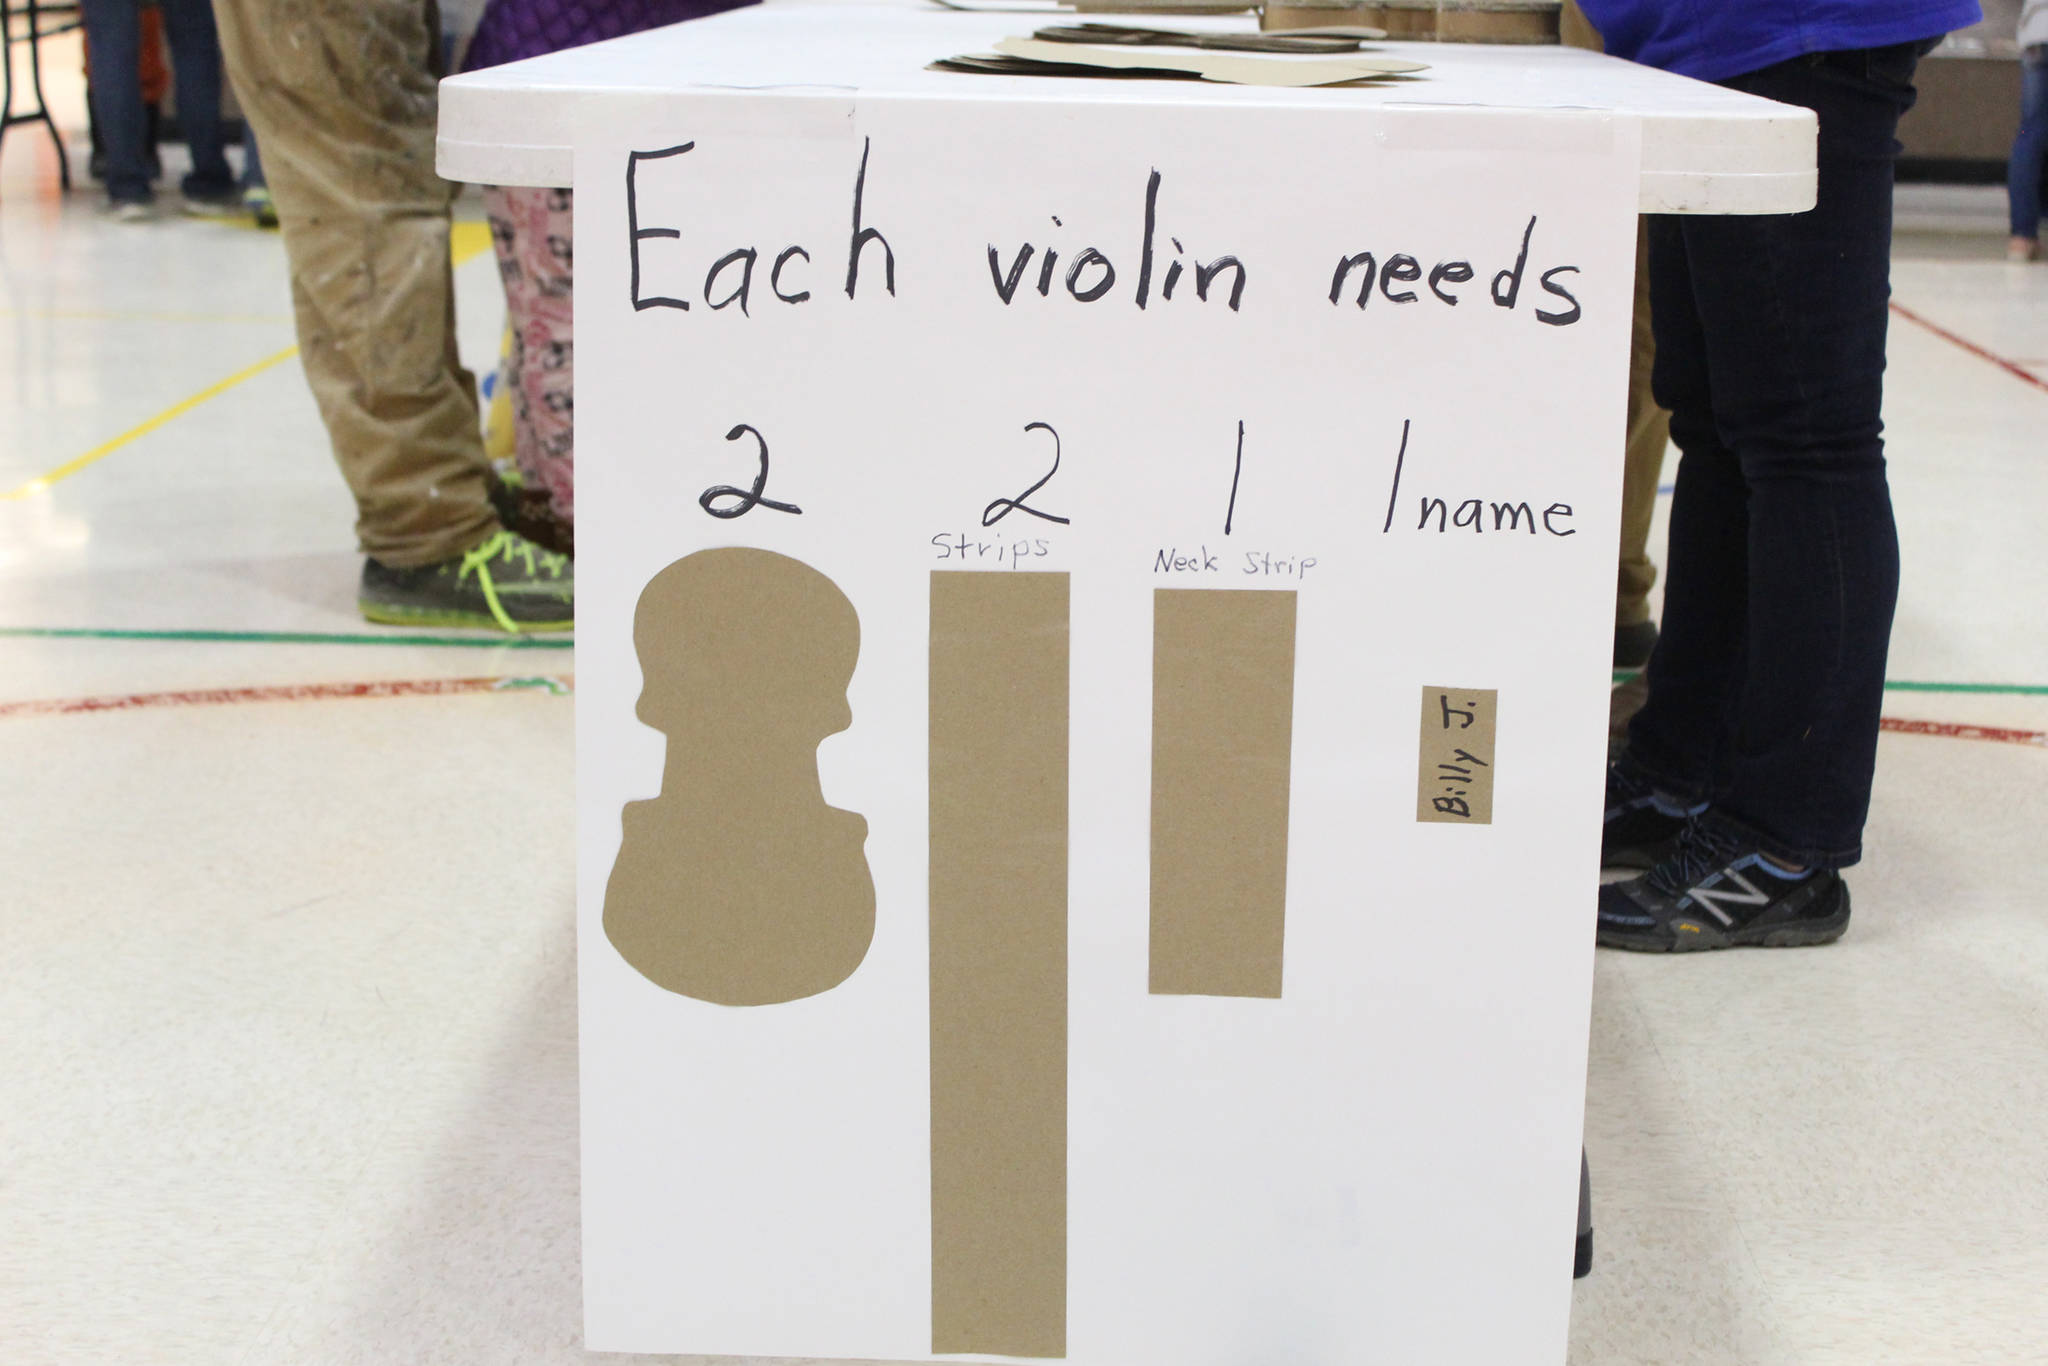 A sign advises students and parents how to make cardboard violins during a craft night at Paul Bank Elementary School on Thursday, Sept. 6, 2018 at the school in Homer, Alaska. The project is part of the school’s Preludes Violin Program, which teaches first and second grade students musicianship and the host of skills that come with it. Students start out with the cardboard violins before graduating to the real instruments later in the year. (Photo by Megan Pacer/Homer News)